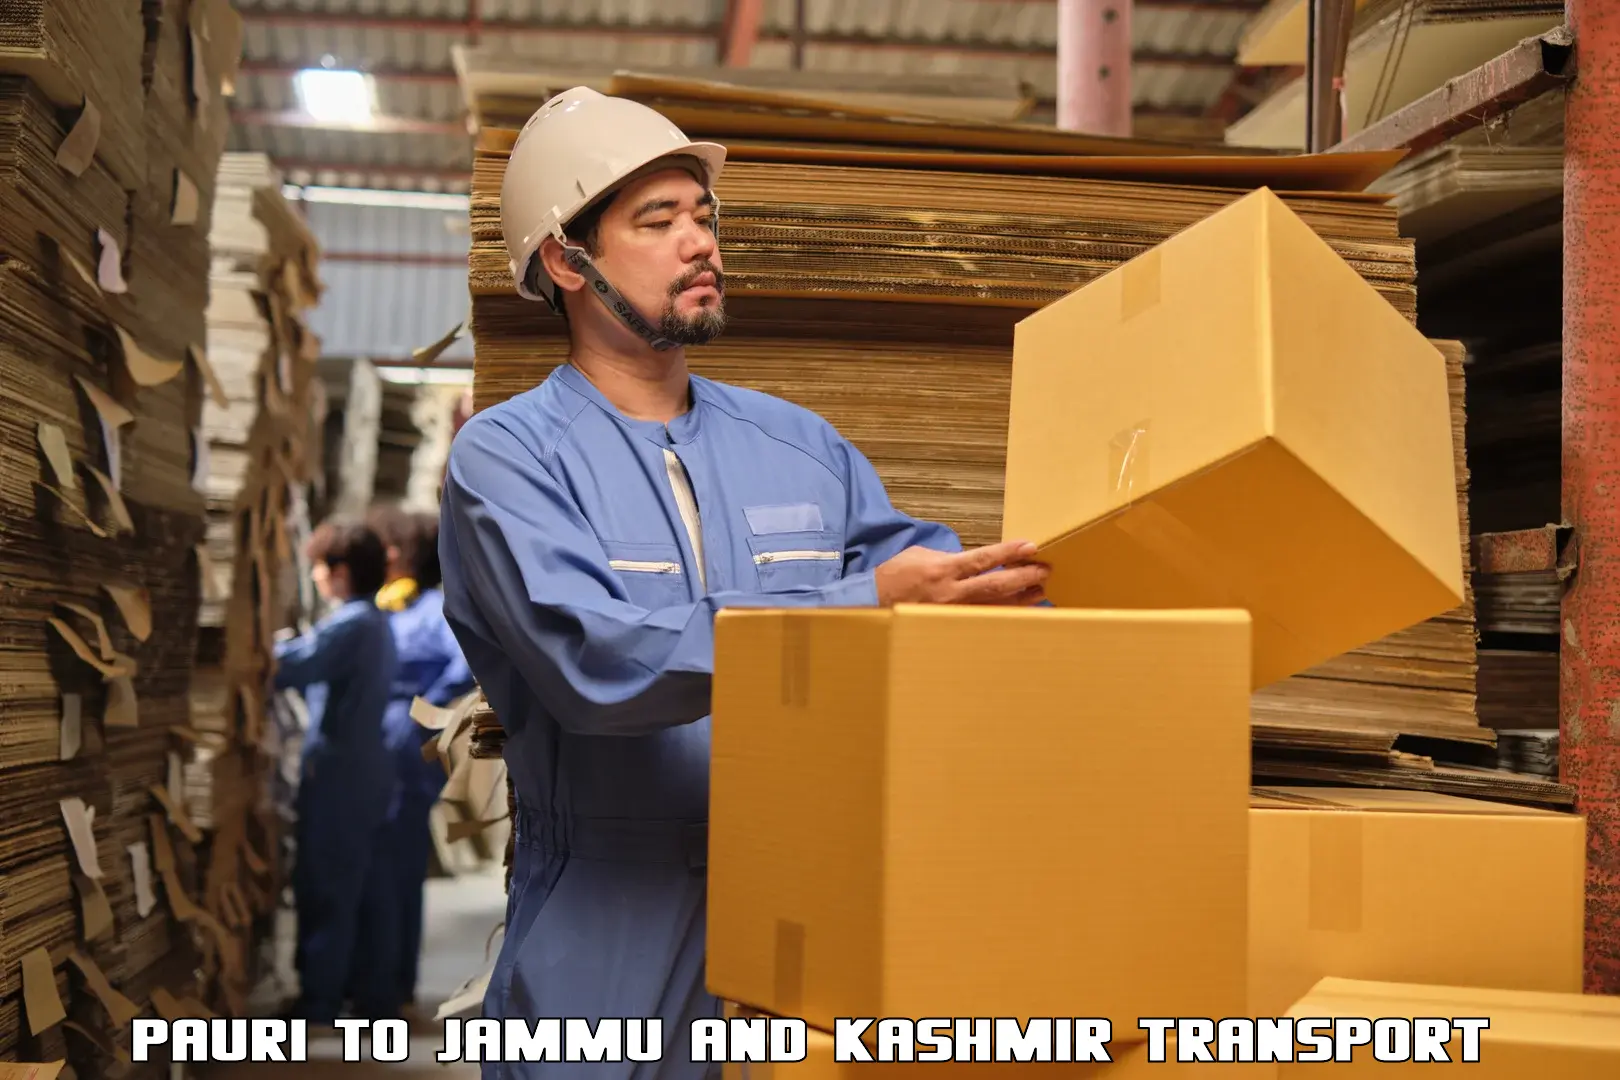 Goods delivery service Pauri to Baramulla